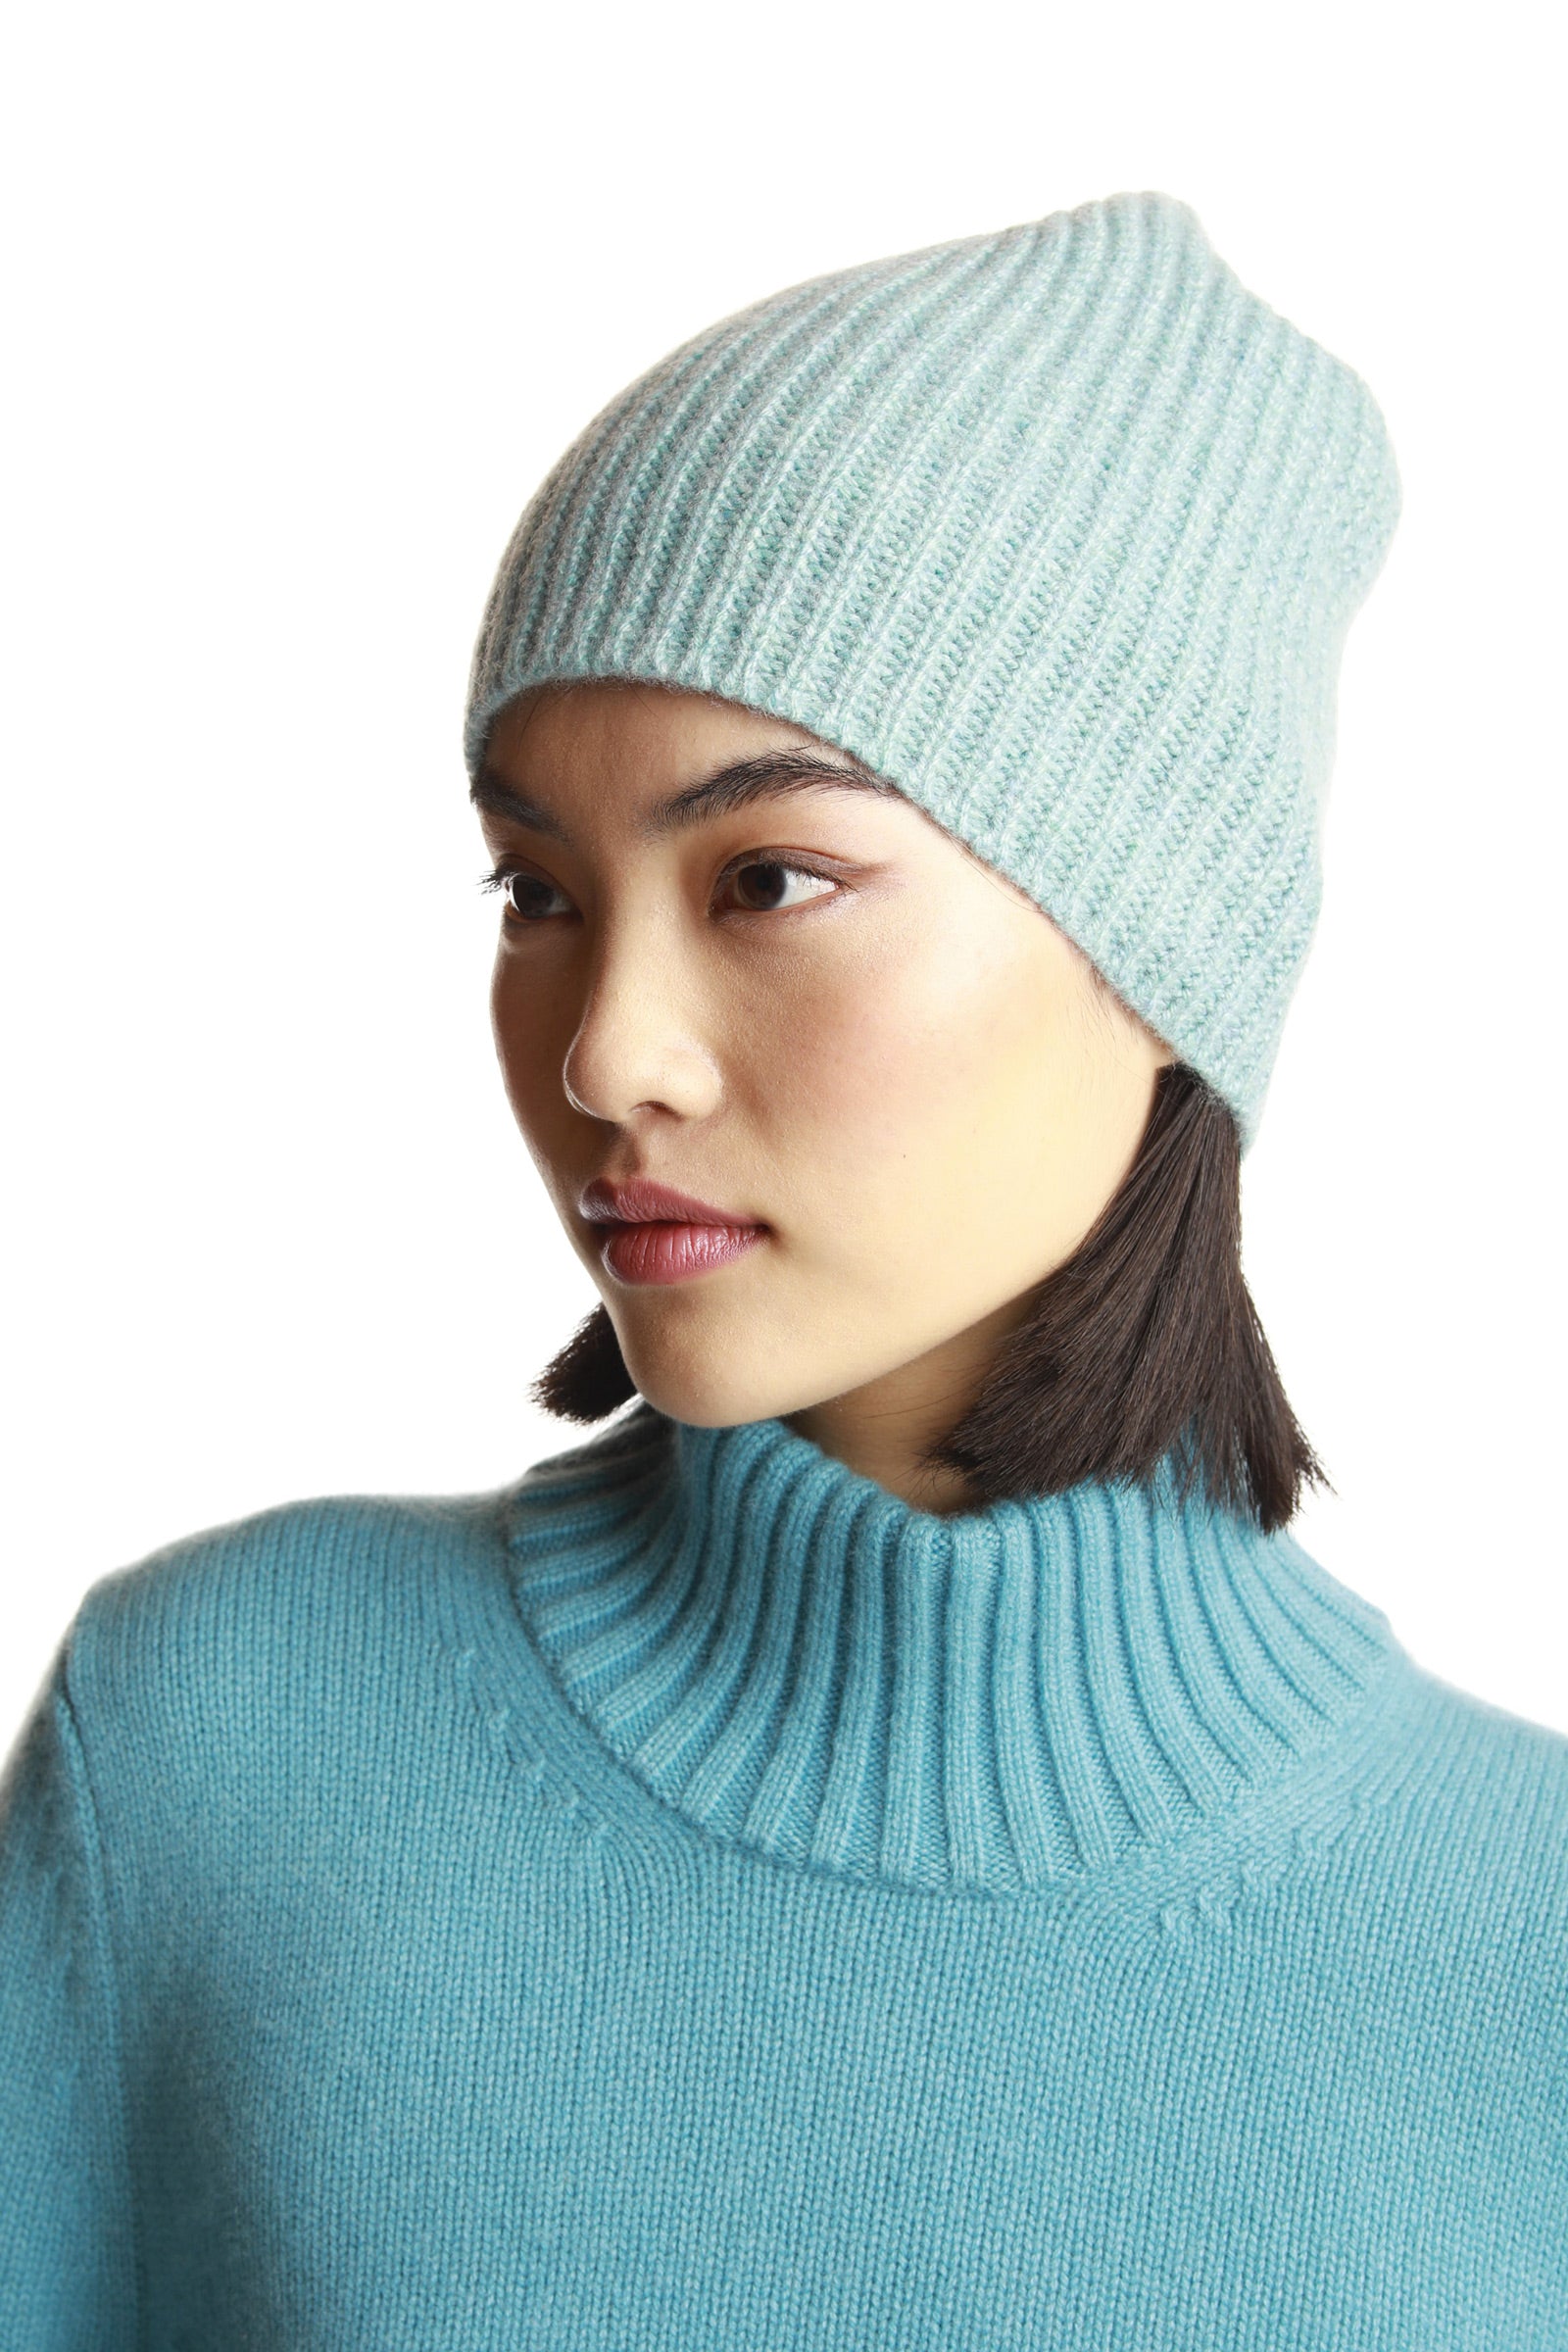 Sweaters of simplicity and style | aethel